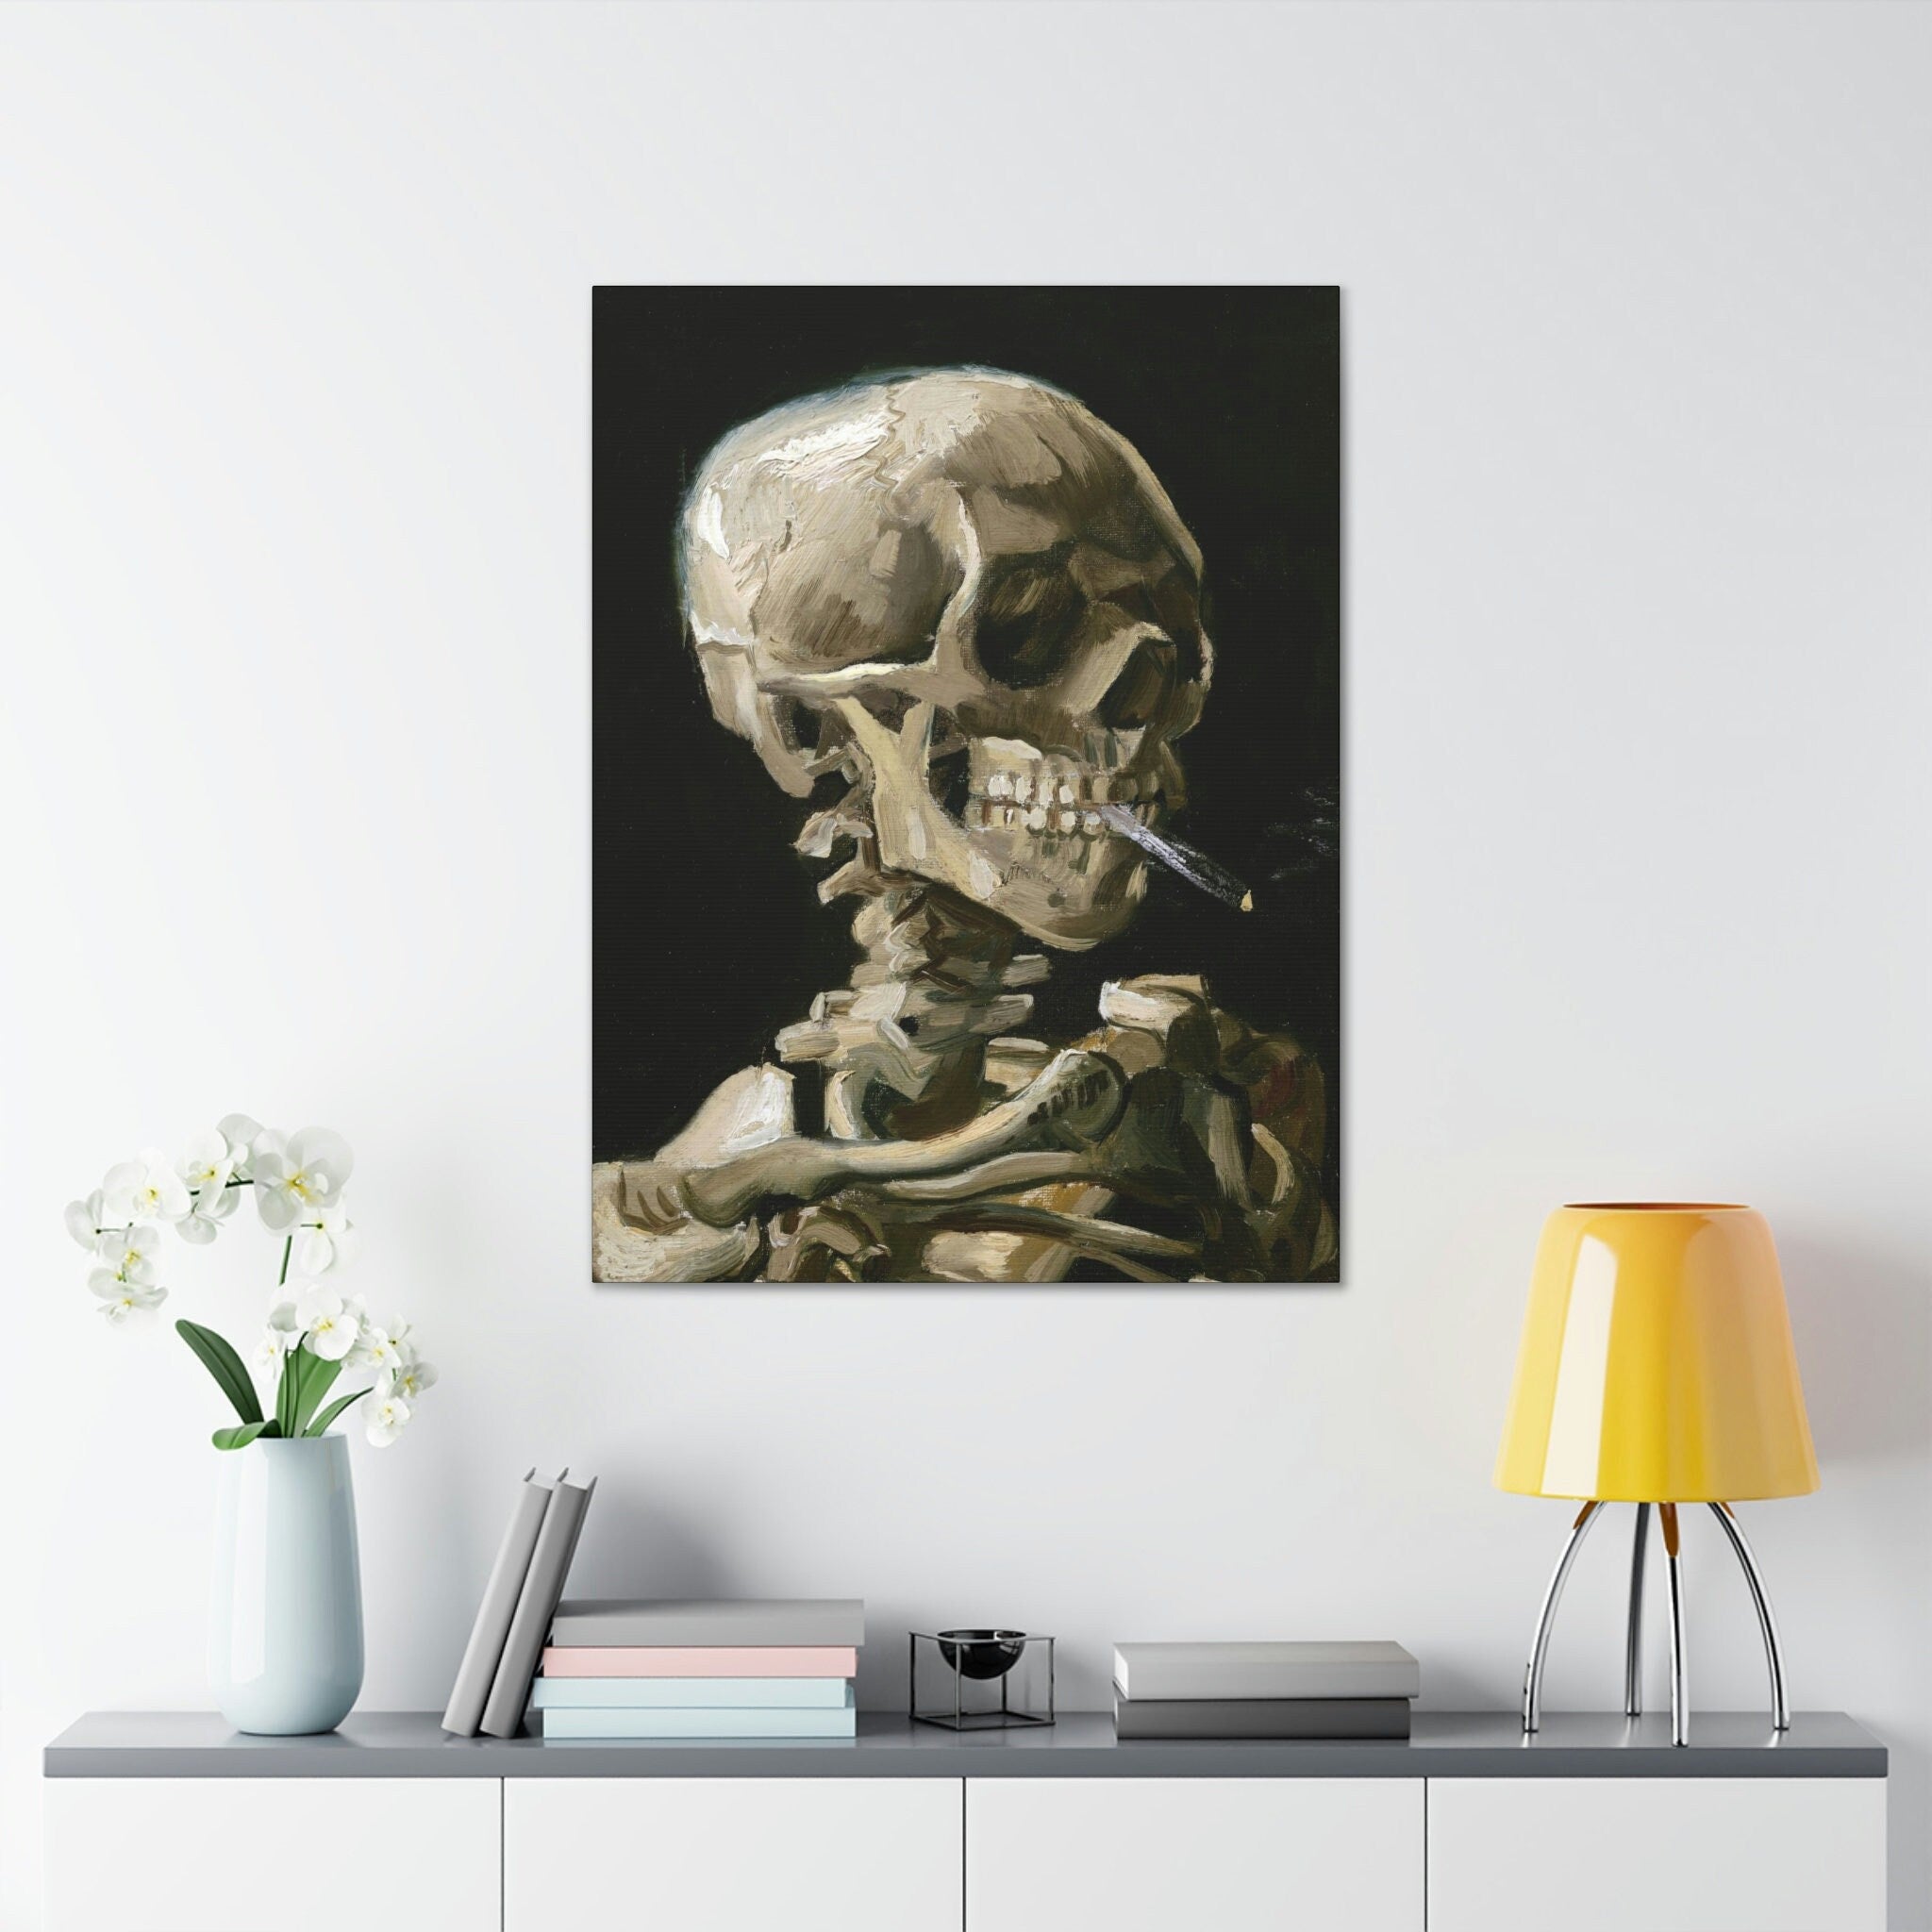 Vincent Van Gogh Iconic Skull of a Skeleton with Burning Cigarette - P